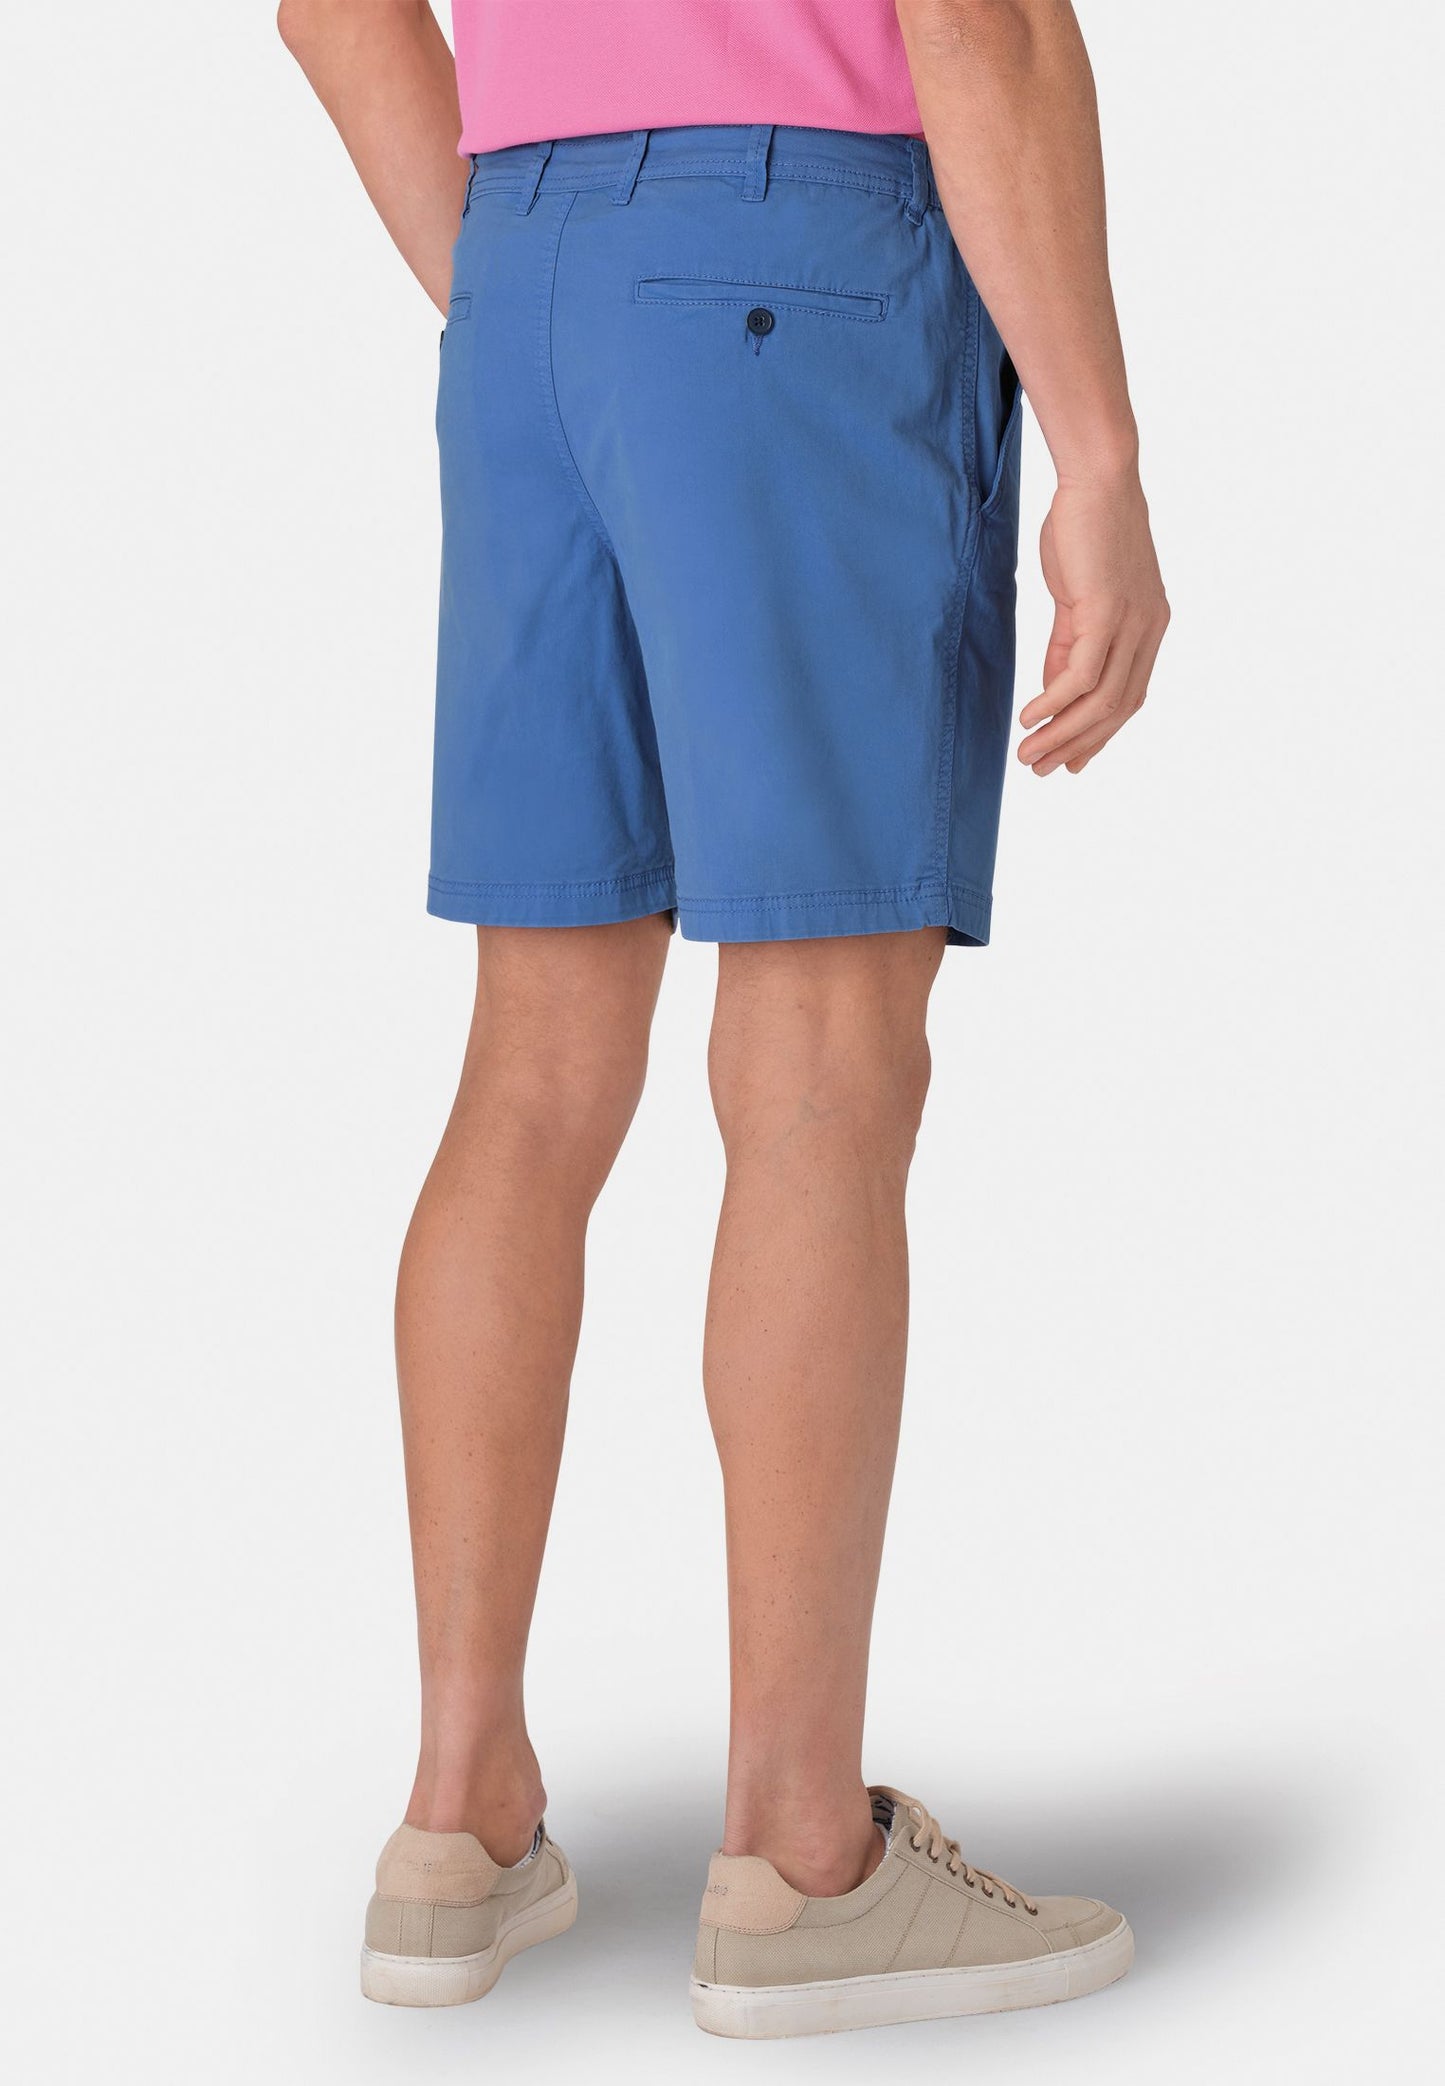 Ribblesdale Cotton Stretch Summer Shorts - Sky Blue